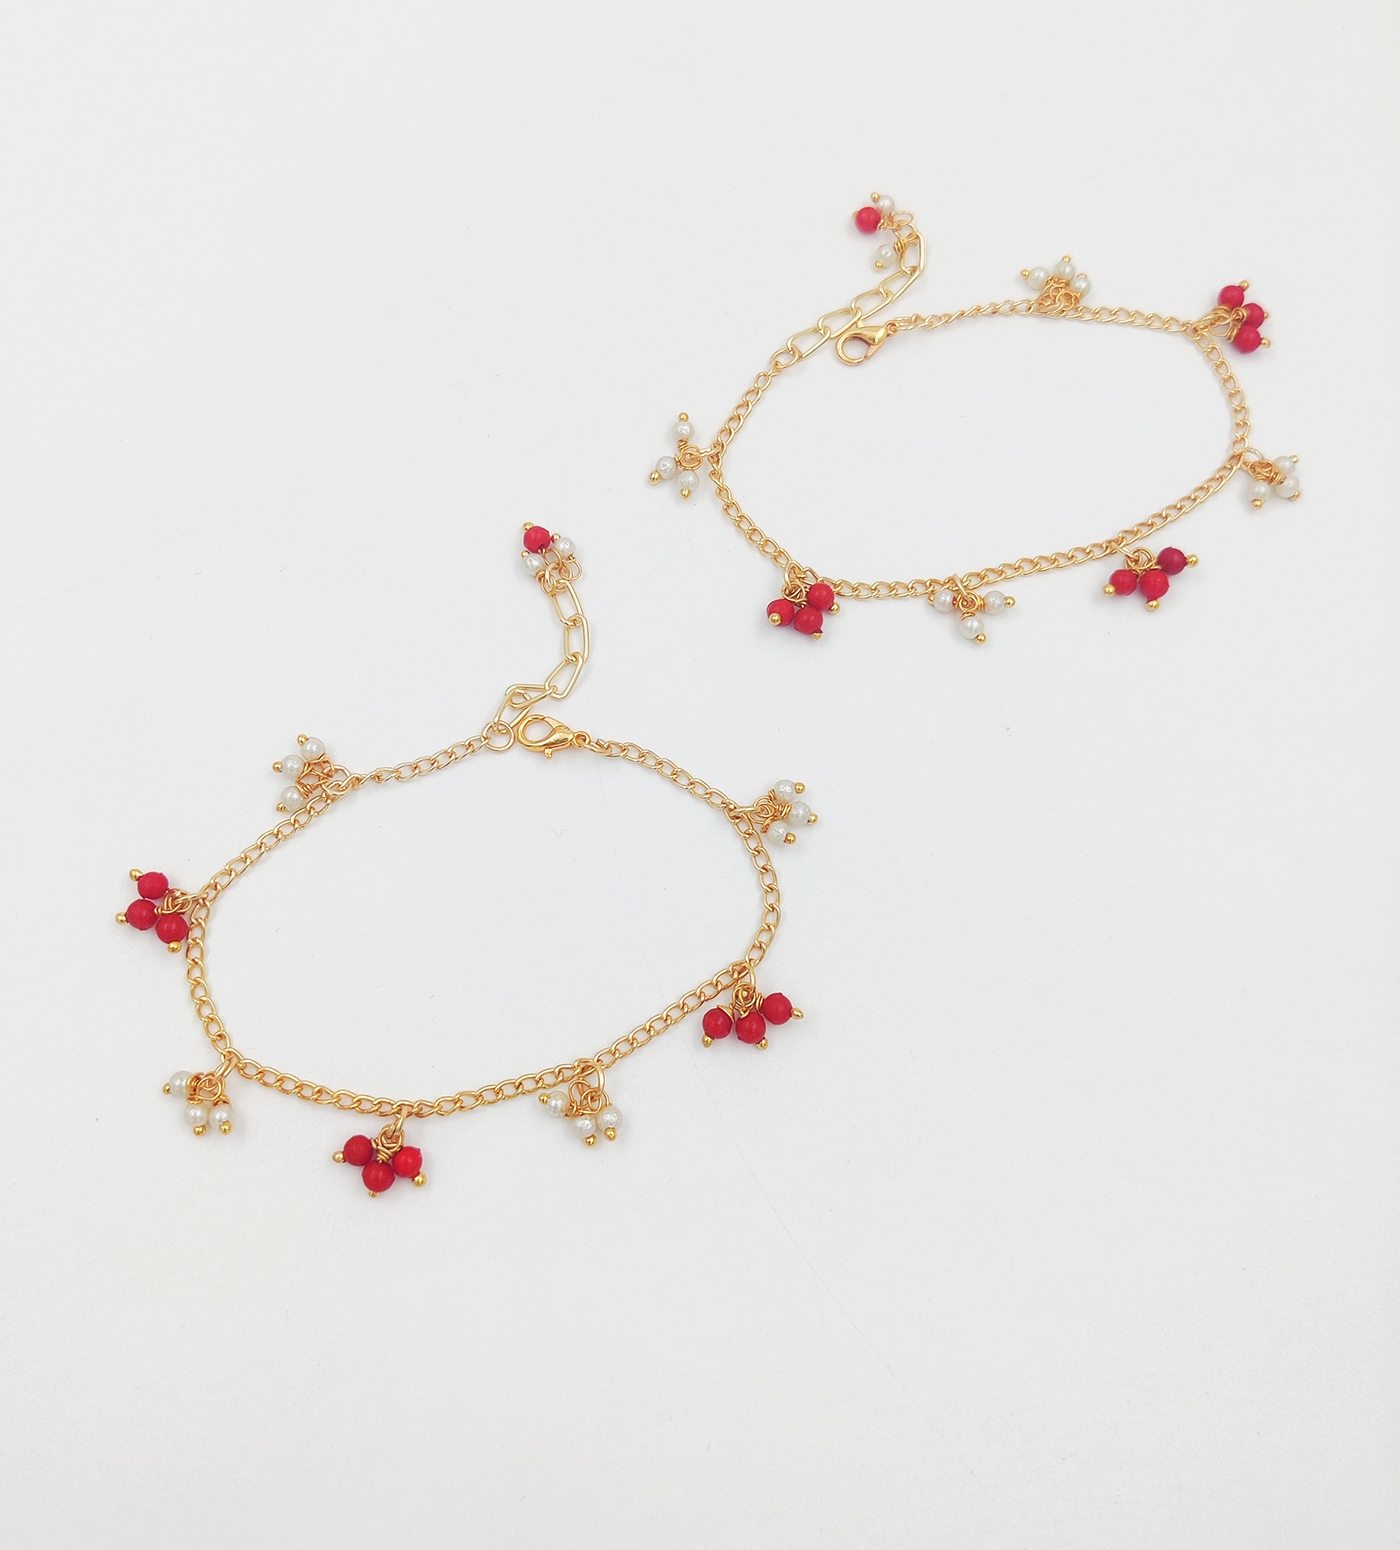 Dangling Beads Anklets - Red, Off White